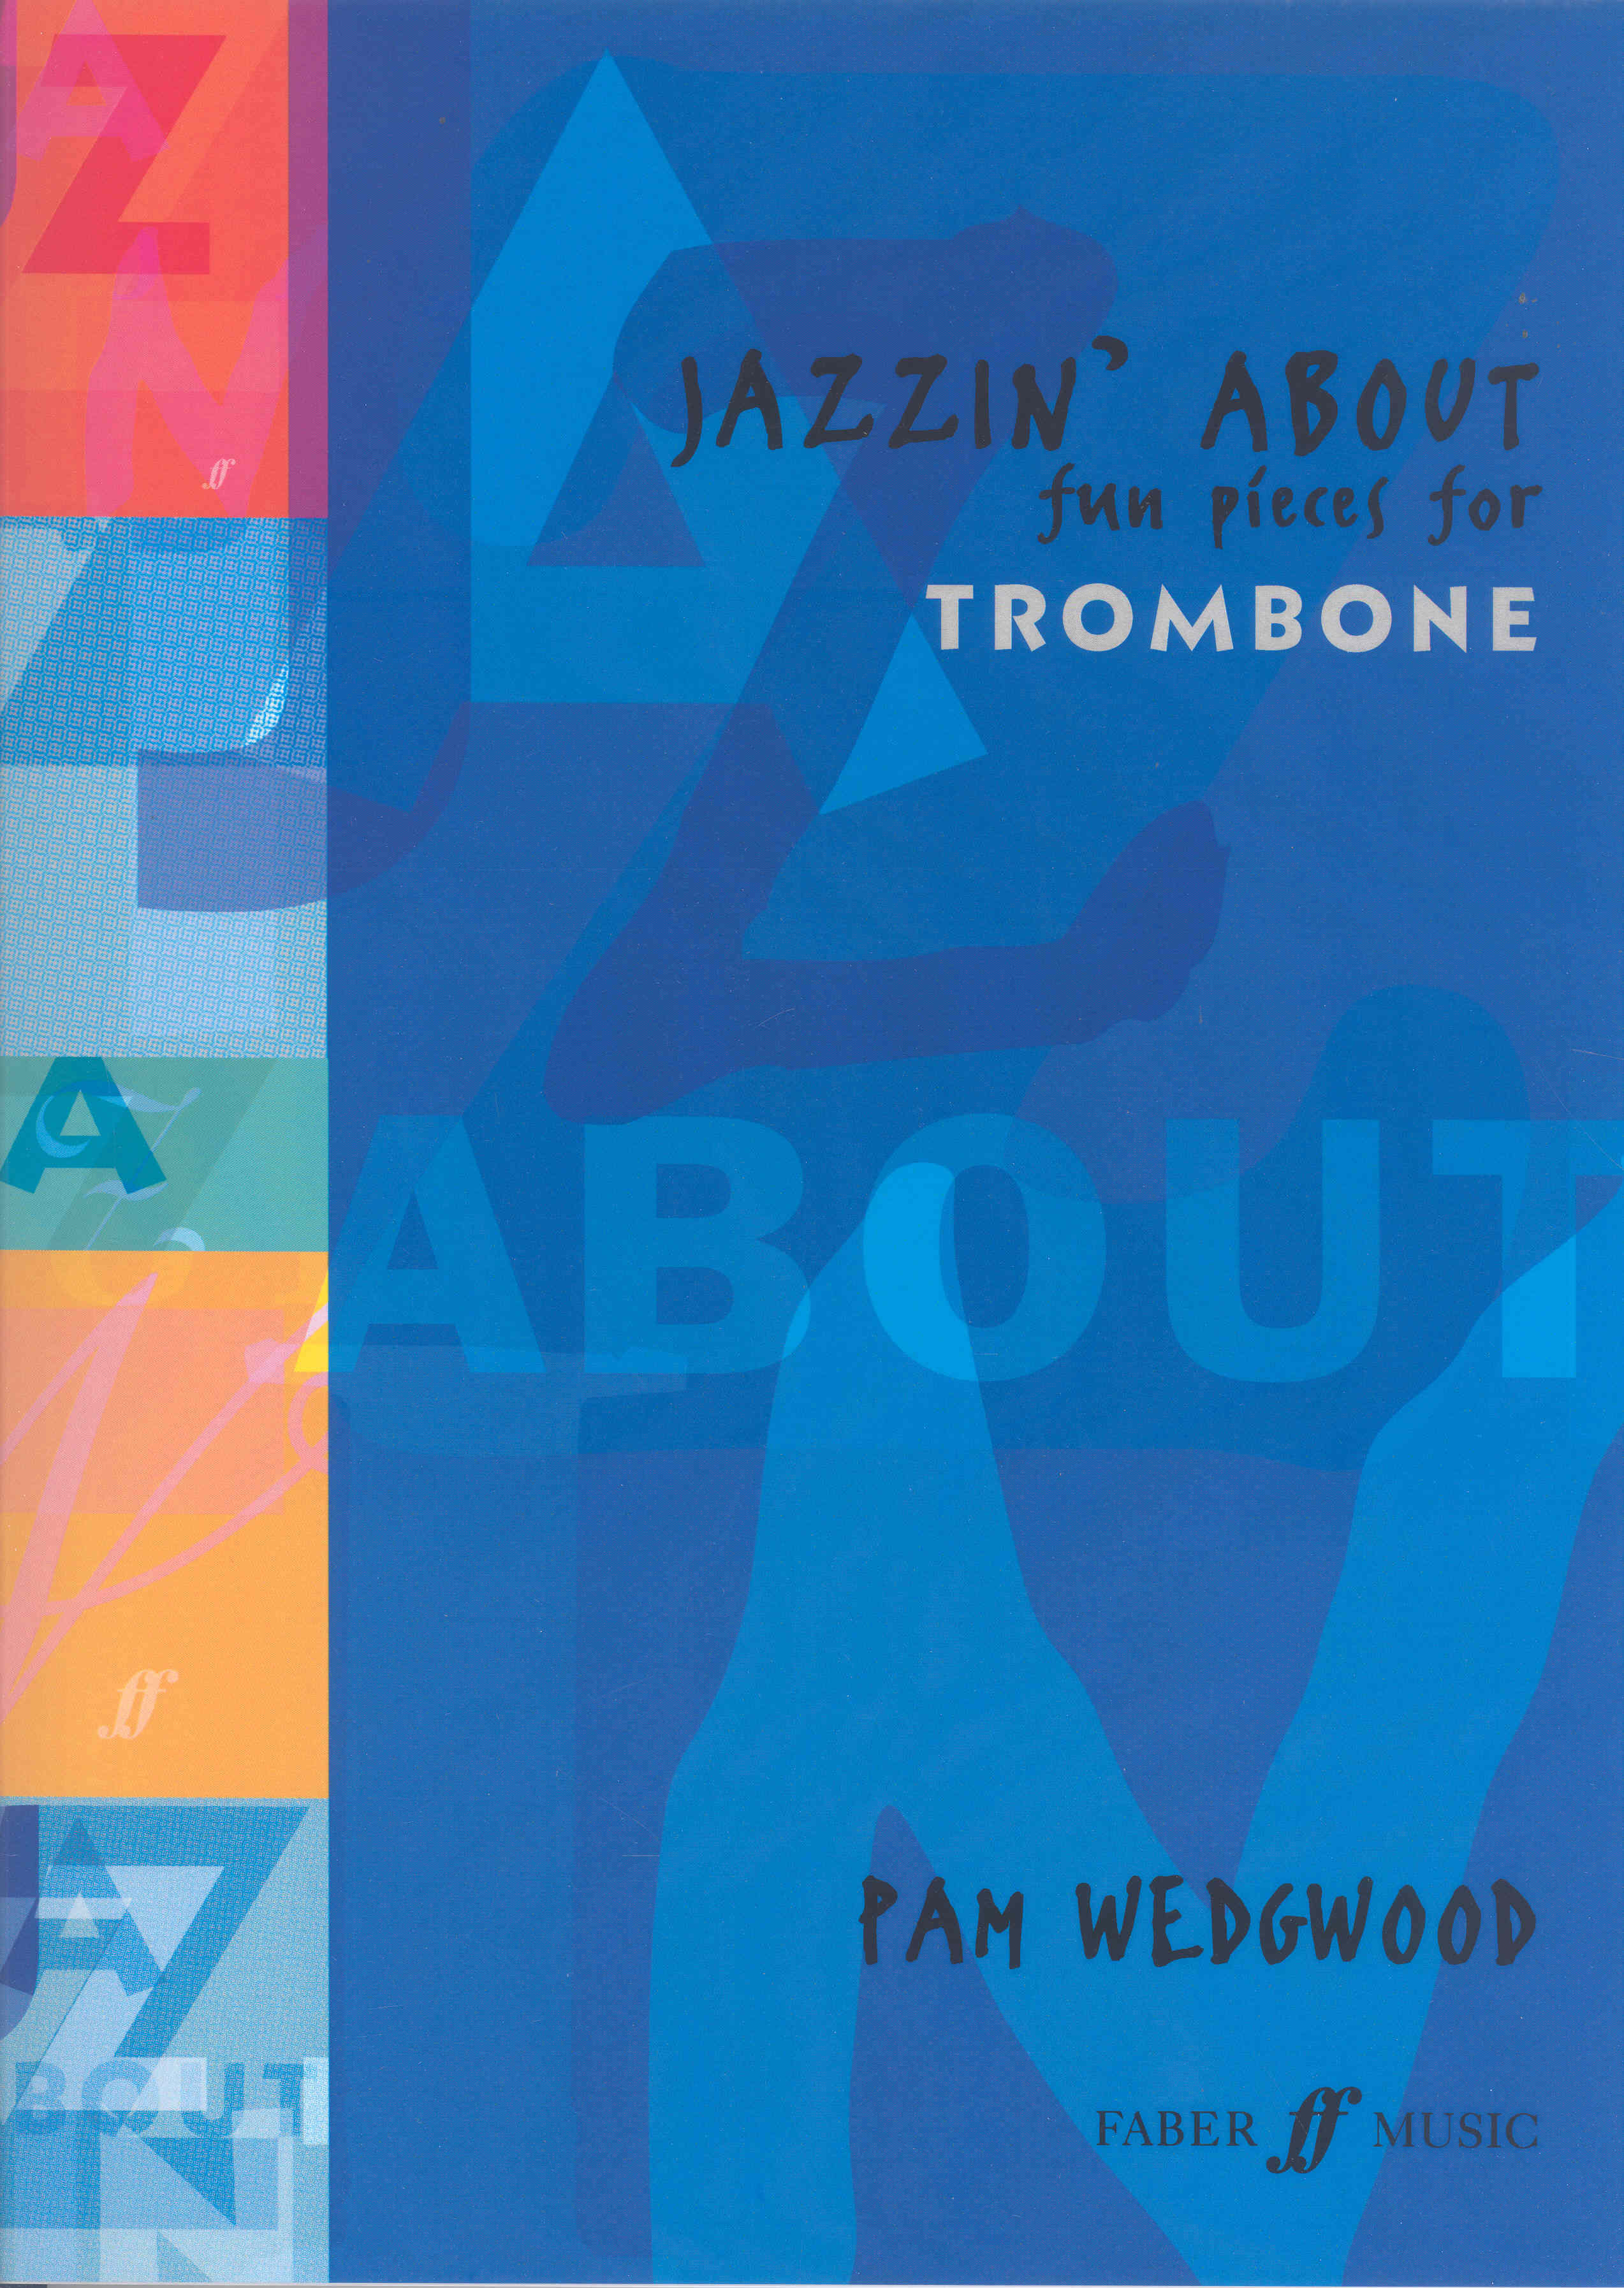 Jazzin About Fun Pieces Trombone Wedgwood Sheet Music Songbook